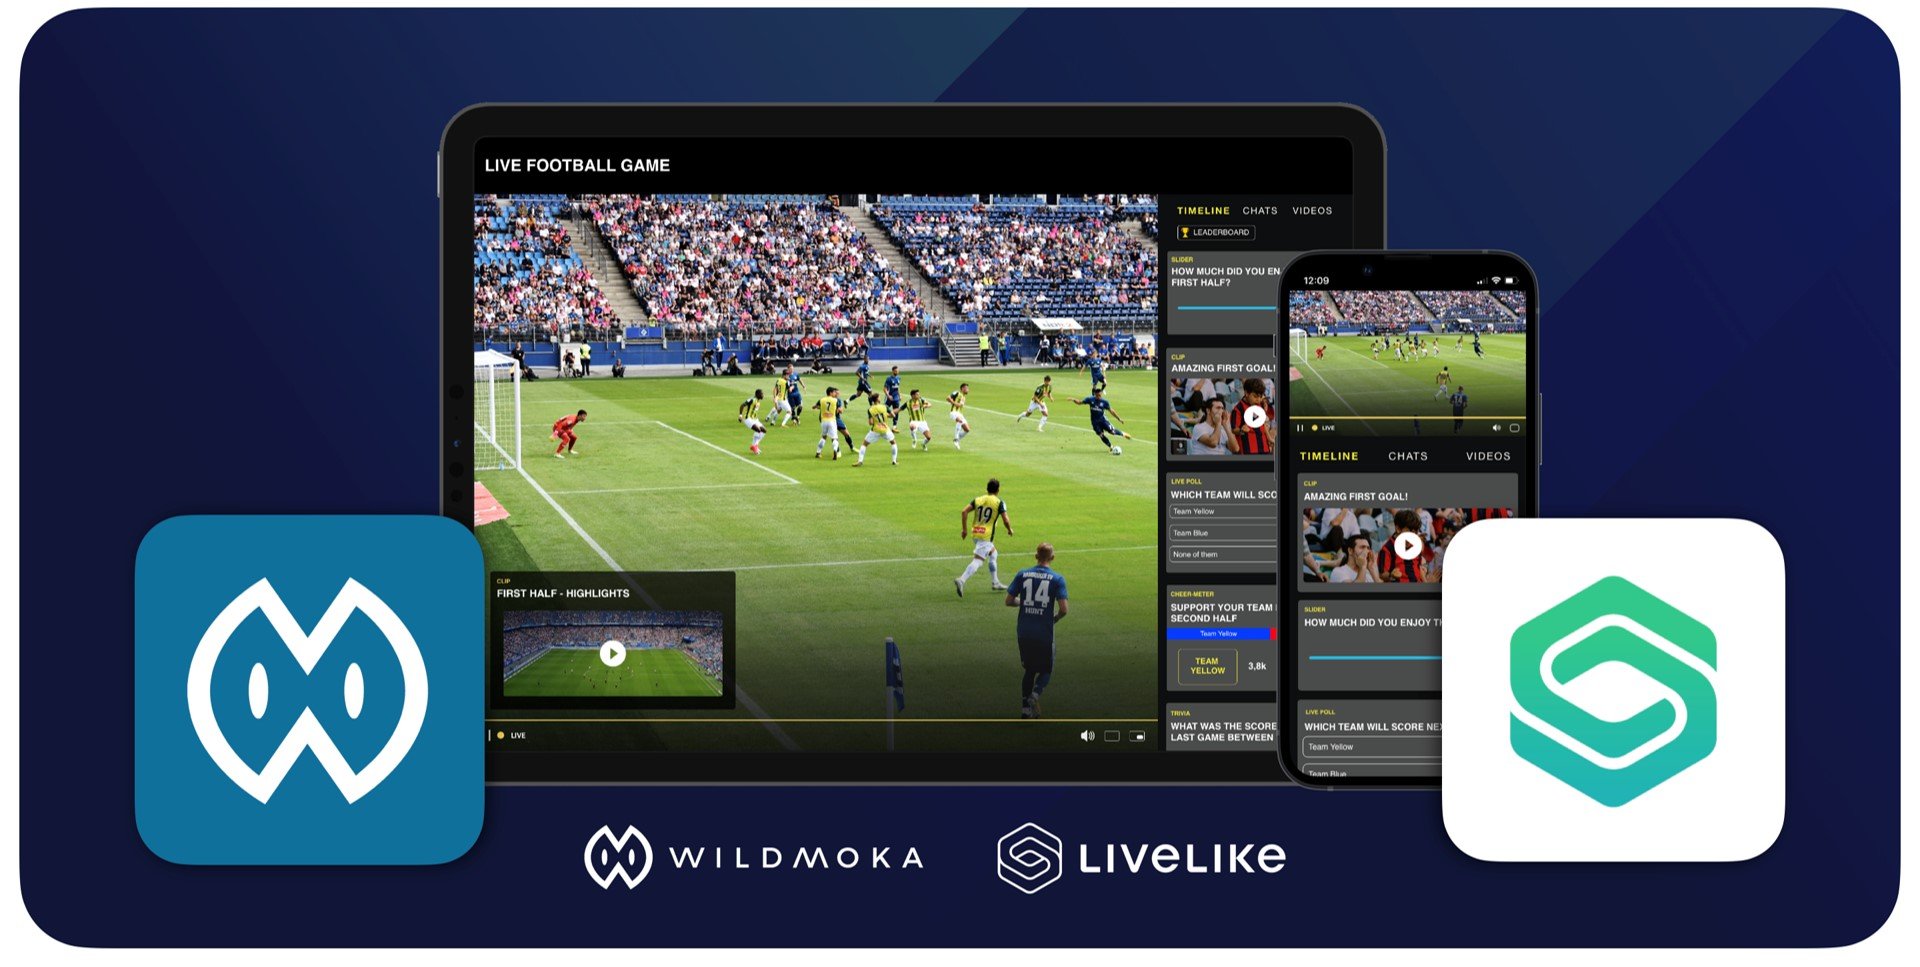 Prime Enhances The NFL Viewing Experience